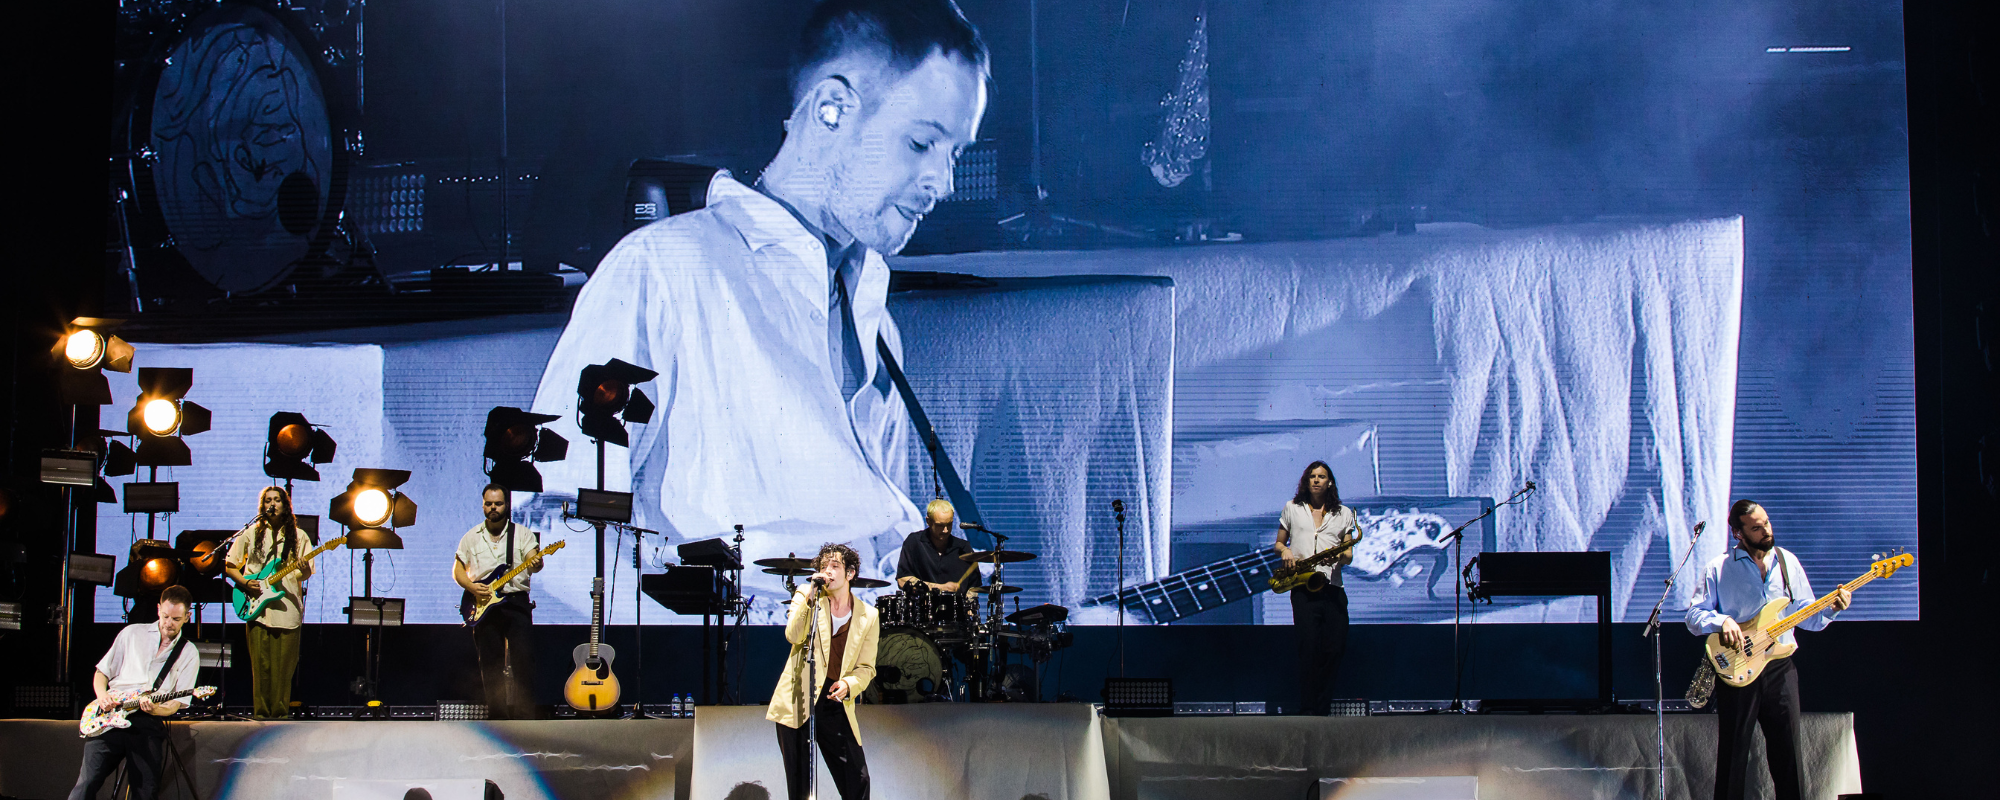 Why The 1975’s At Their Very Best Tour Lives Up to Its Name